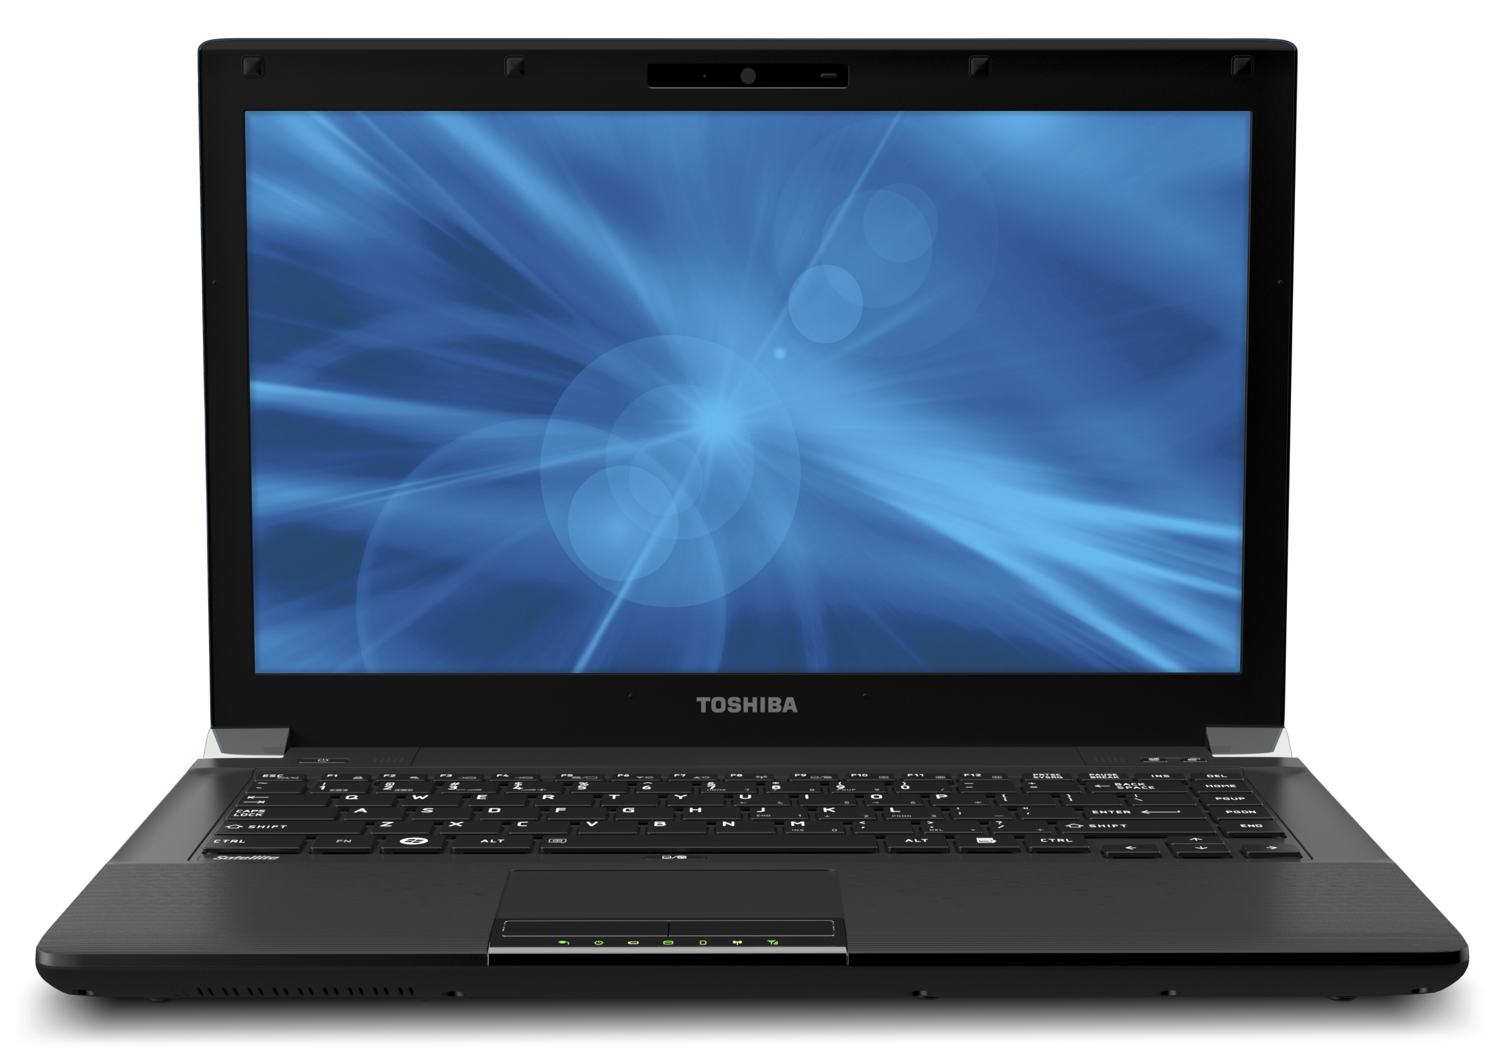 http://thetechjournal.com/wp-content/uploads/images/1202/1330098068-toshiba-satellite-r845s85-140inch-led-laptop-1.jpg